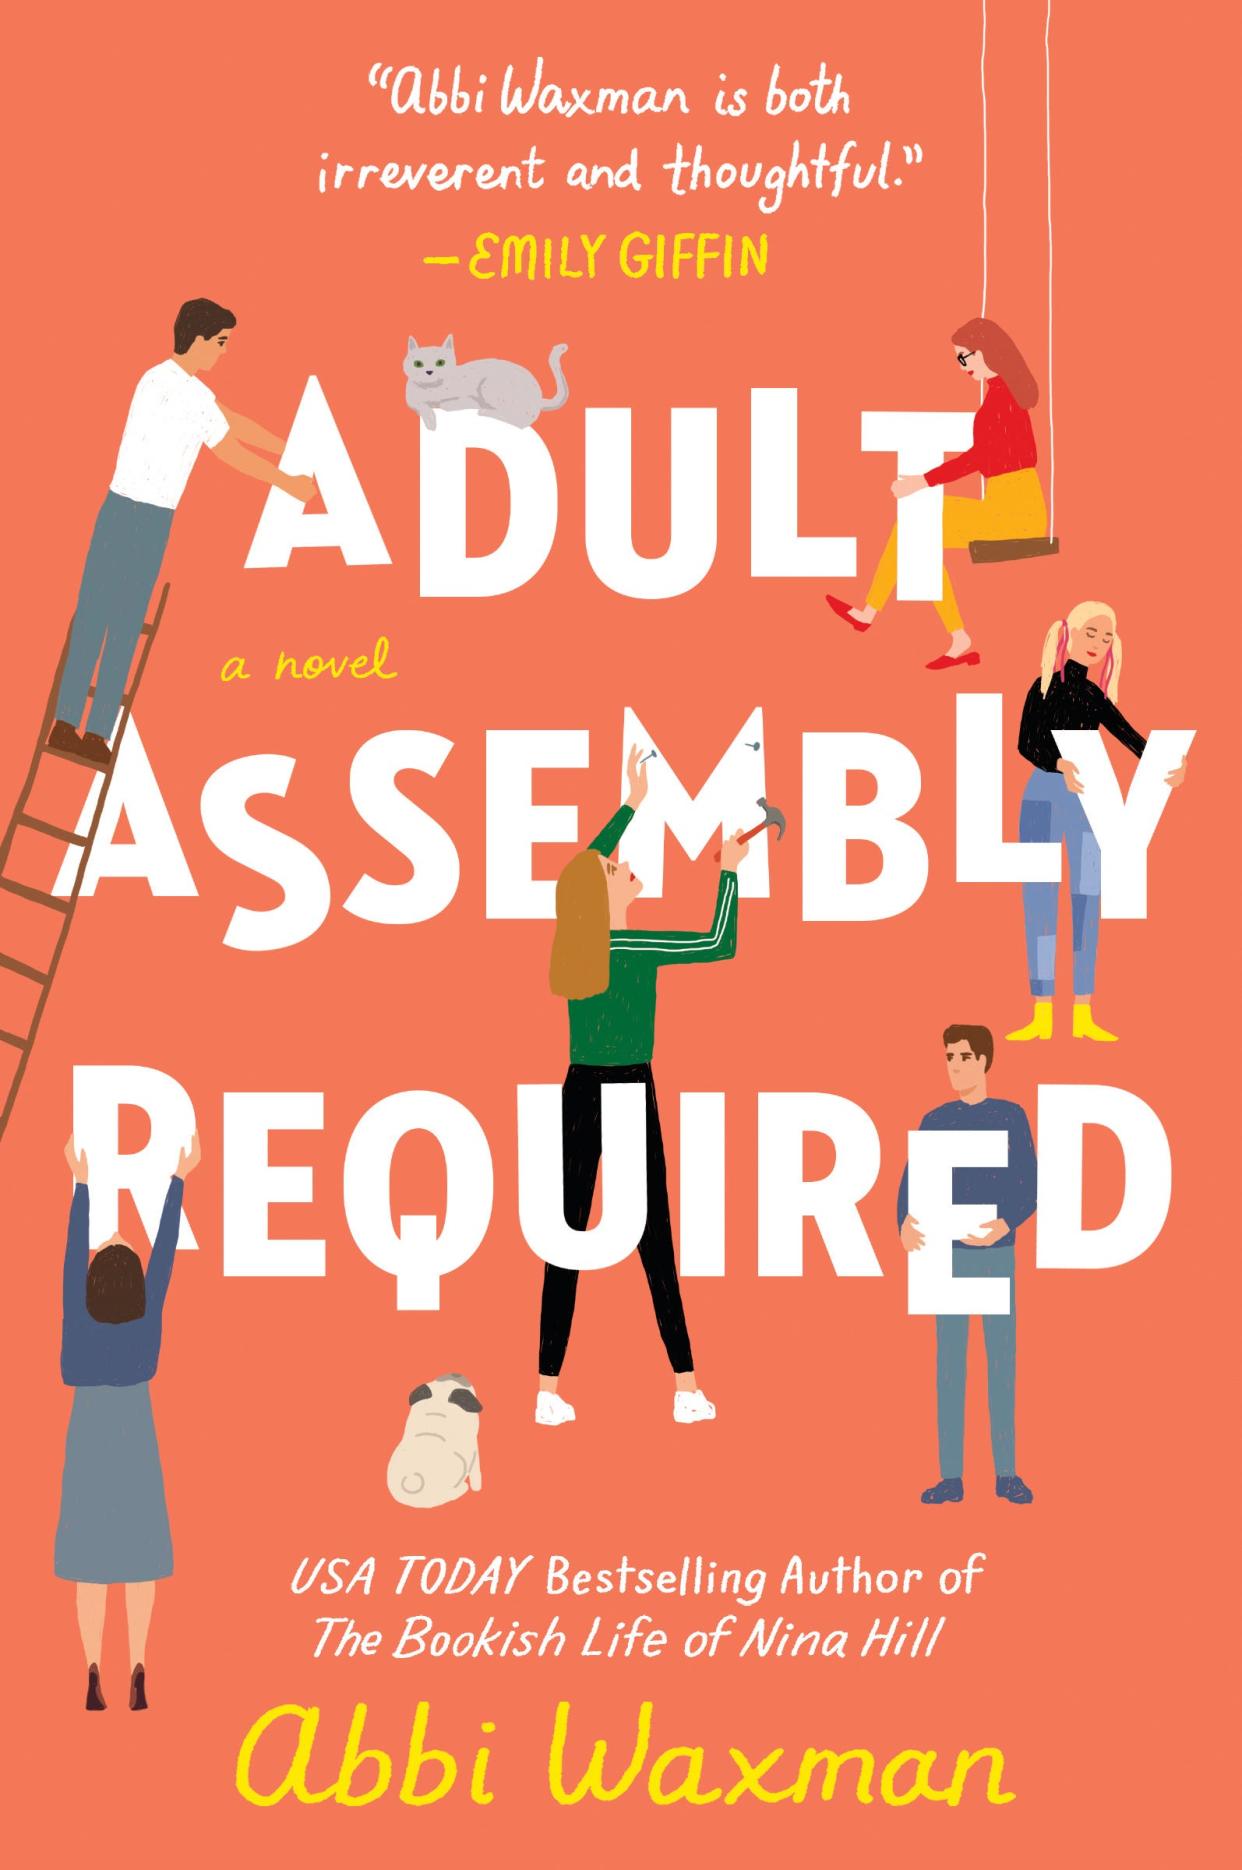 "Adult Assembly Required," by Abbi Waxman